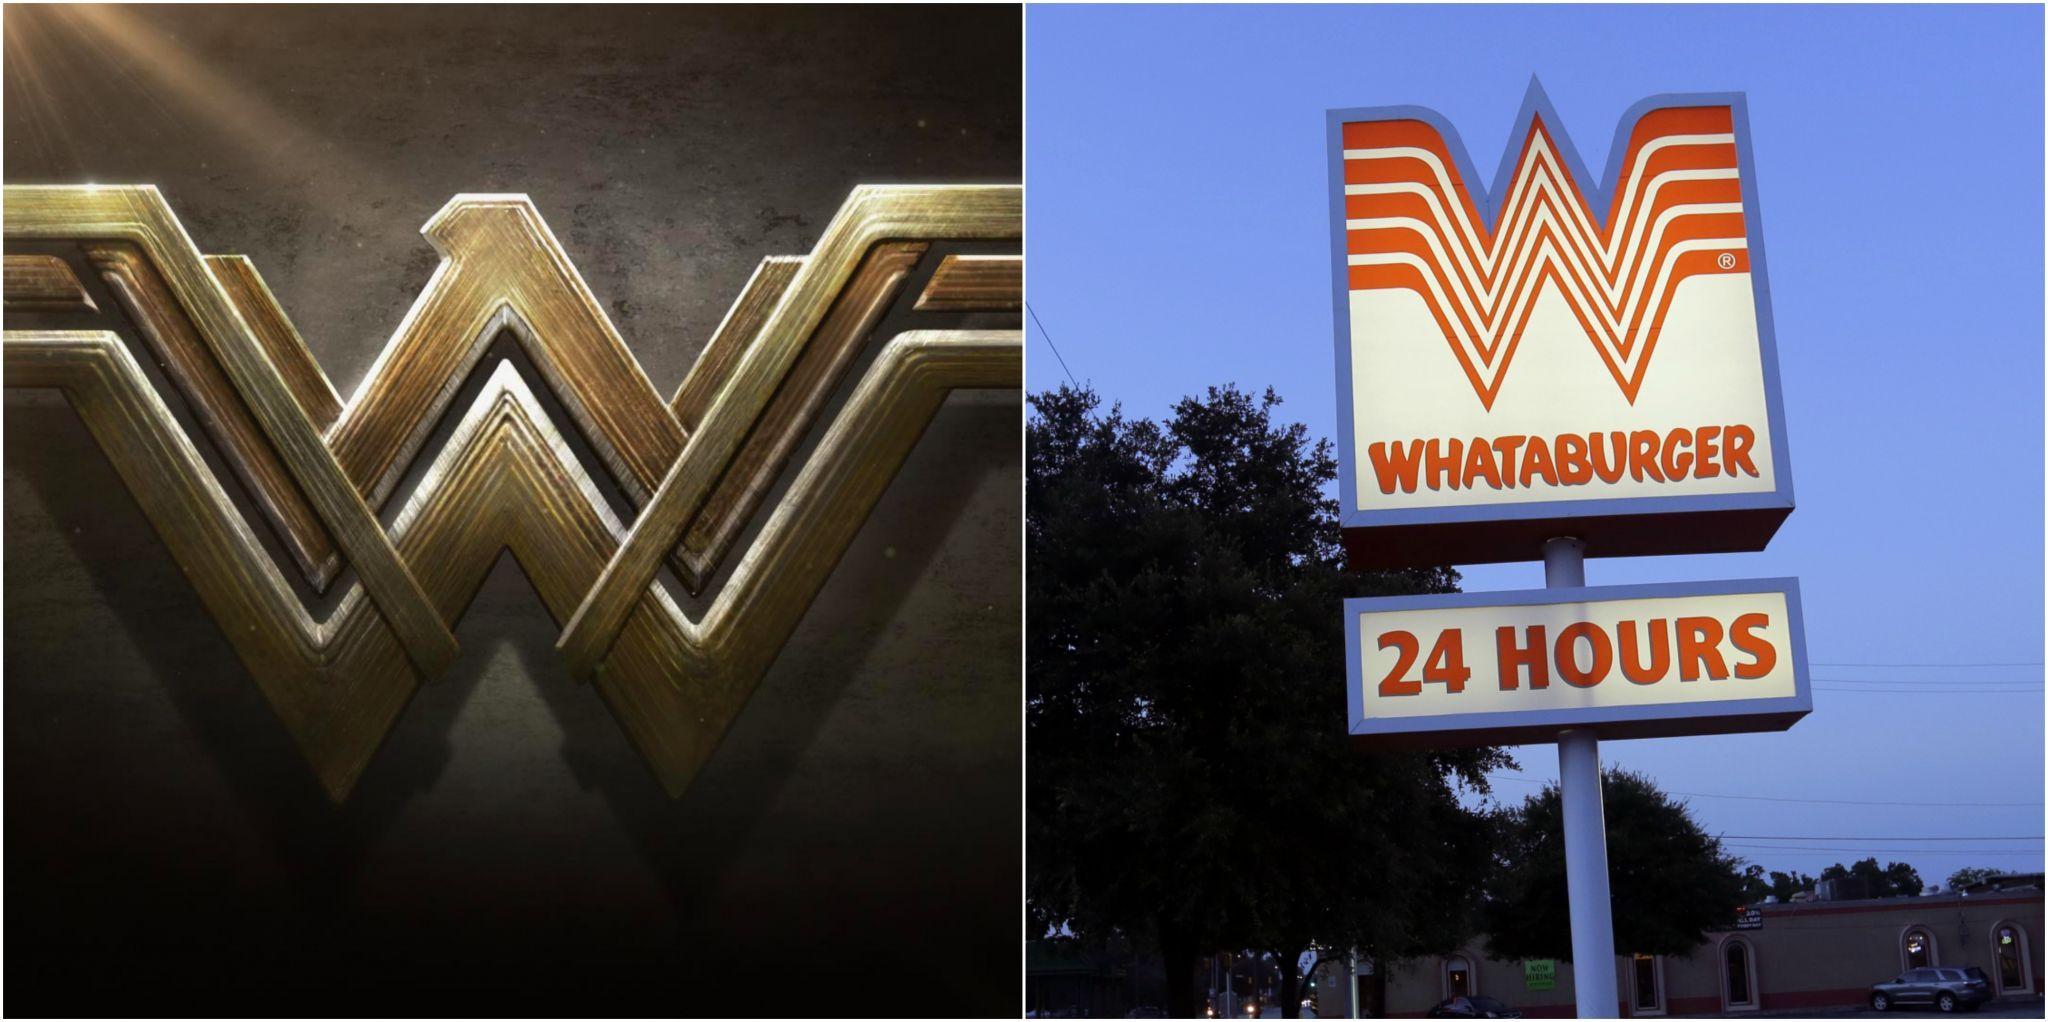 Whataburger Logo - Whataburger, DC Comics are currently discussing Wonder Woman's new